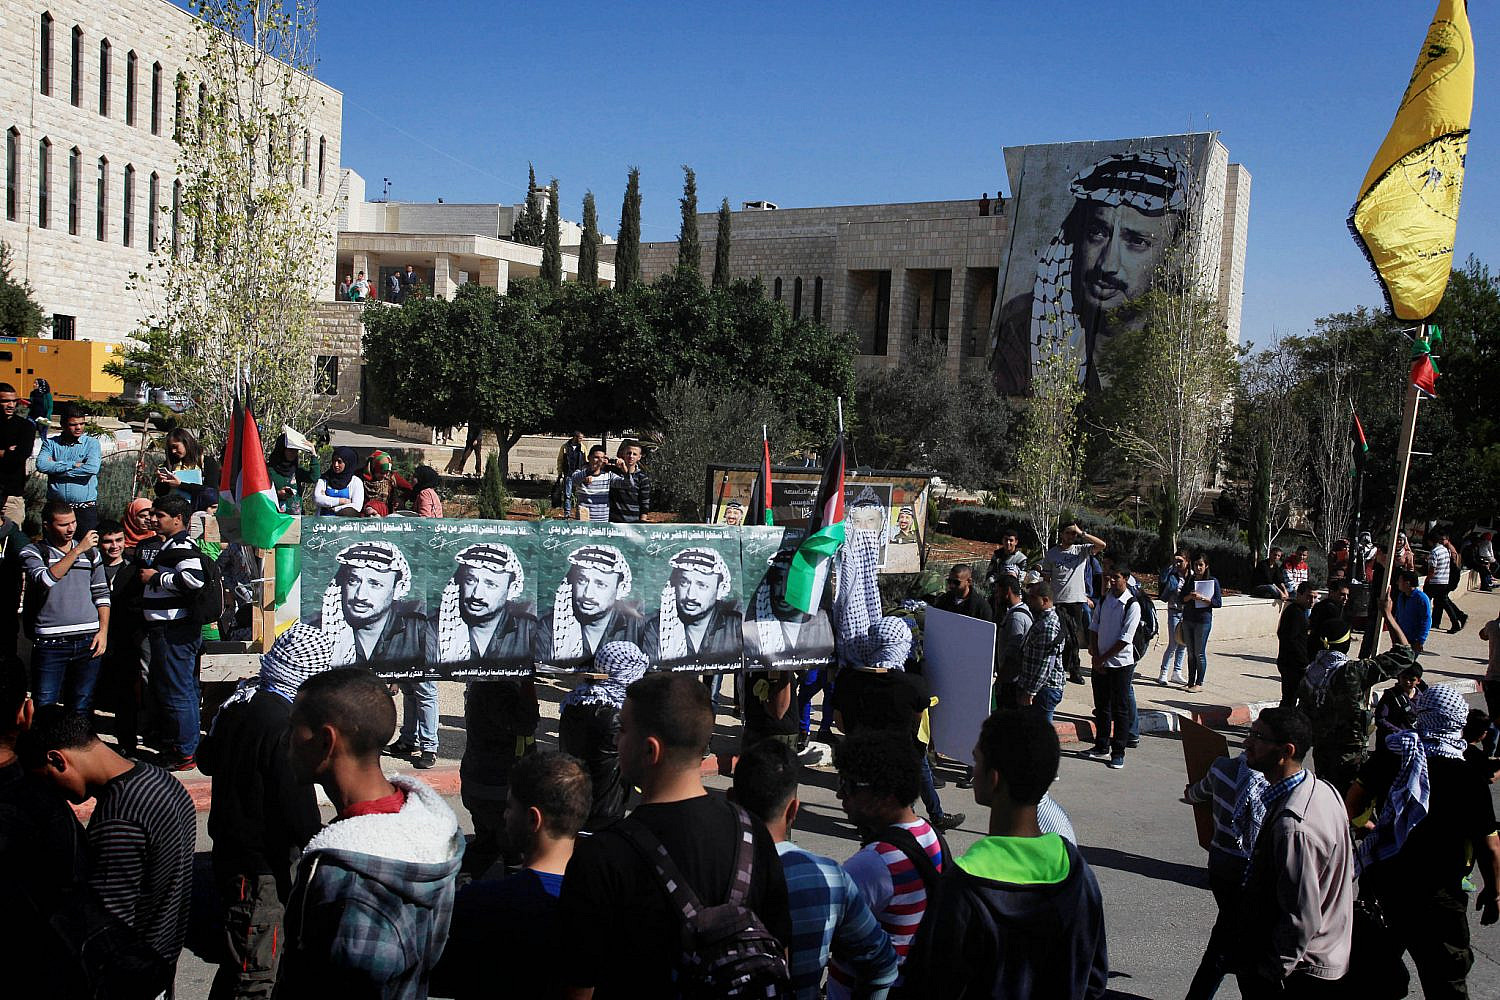 Palestinian university students march during a ceremony marking the 9th anniversary of Yasser Arafat's death, at the Birzeit University campus, near the West Bank city of Ramallah, November 11, 2013. (Issam Rimawi/Flash90)